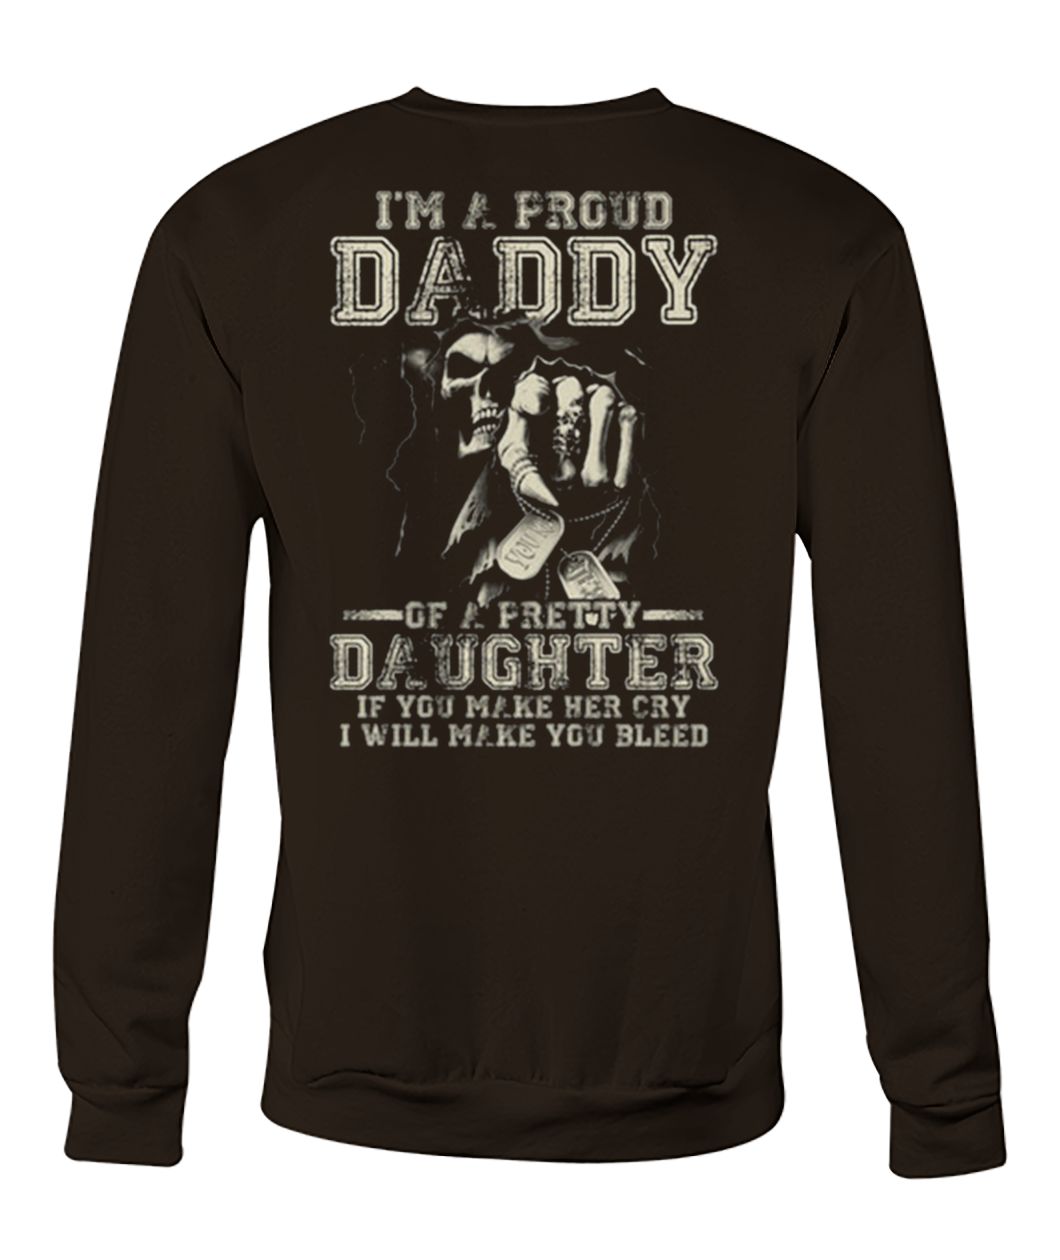 Skull I'm a proud daddy of a pretty daughter crew neck sweatshirt